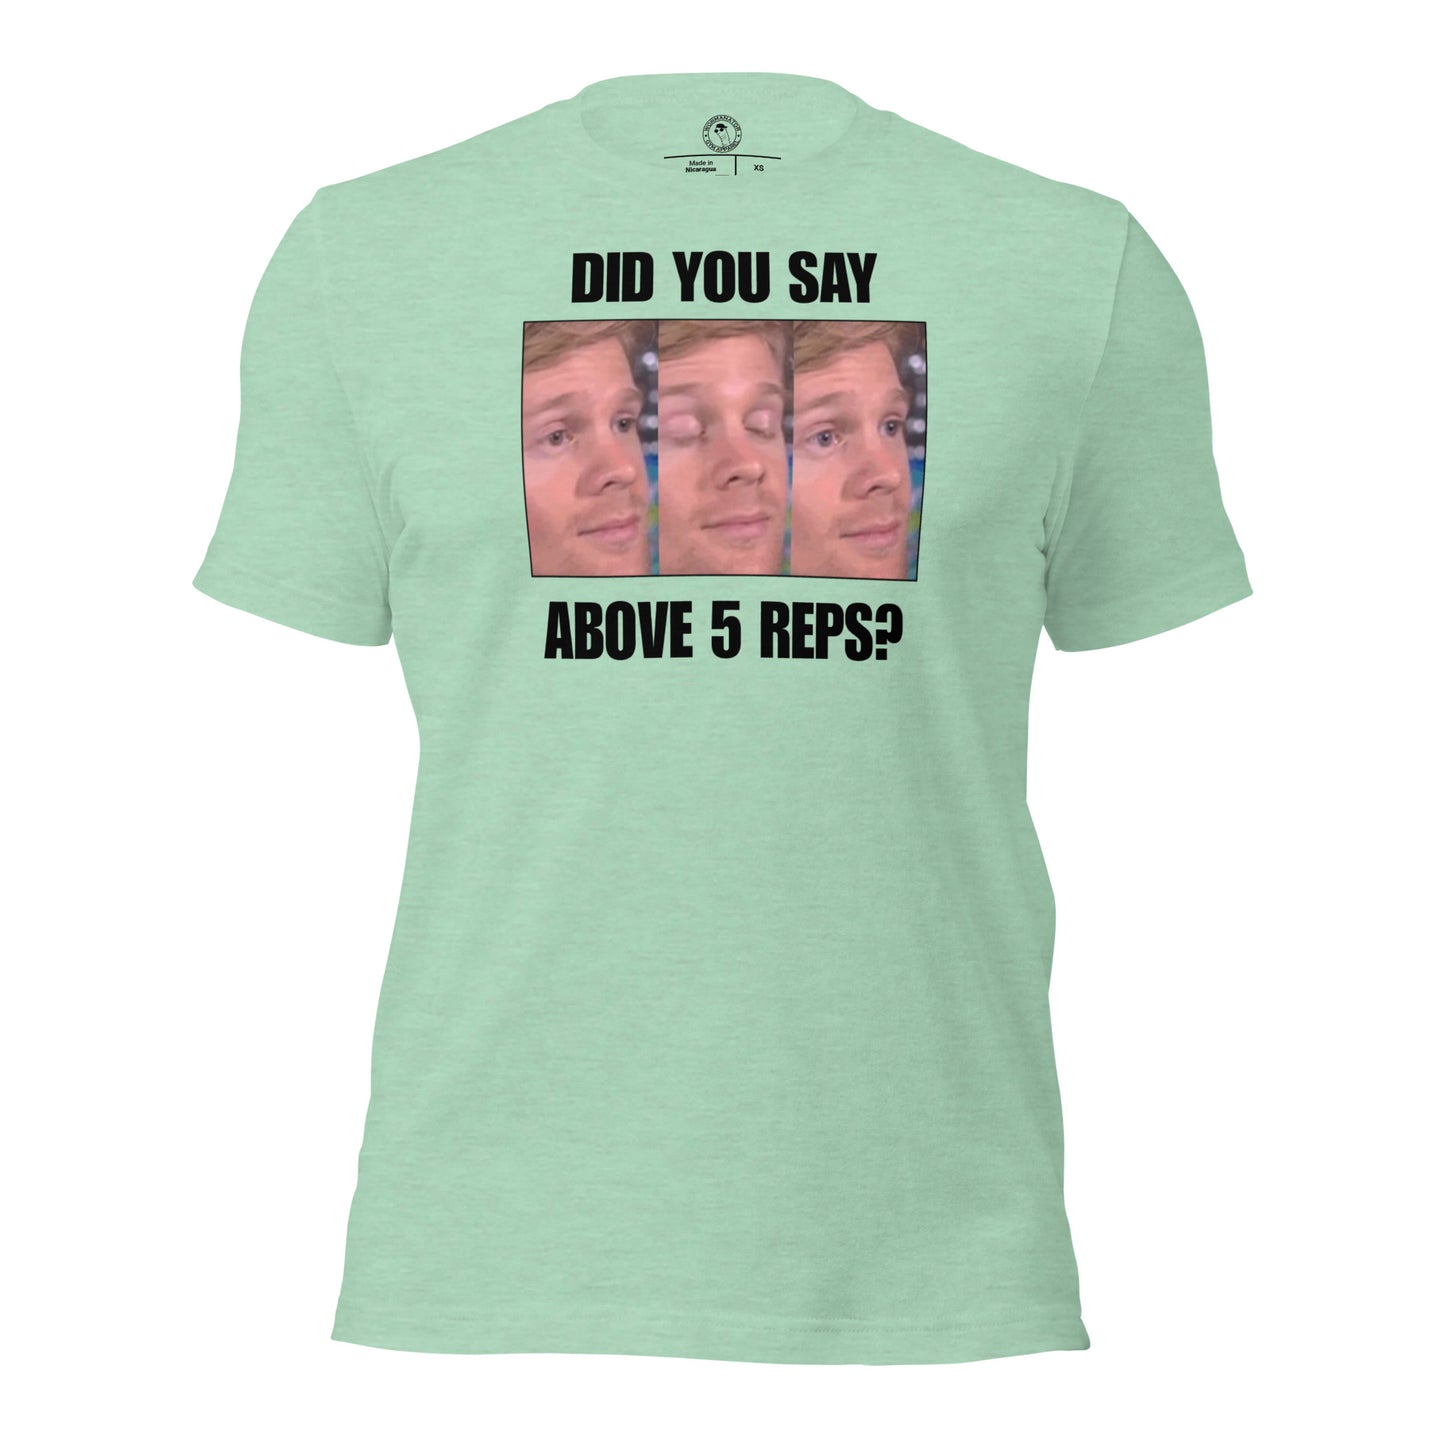 Above 5 Reps is Cardio Shirt in Heather Prism Mint